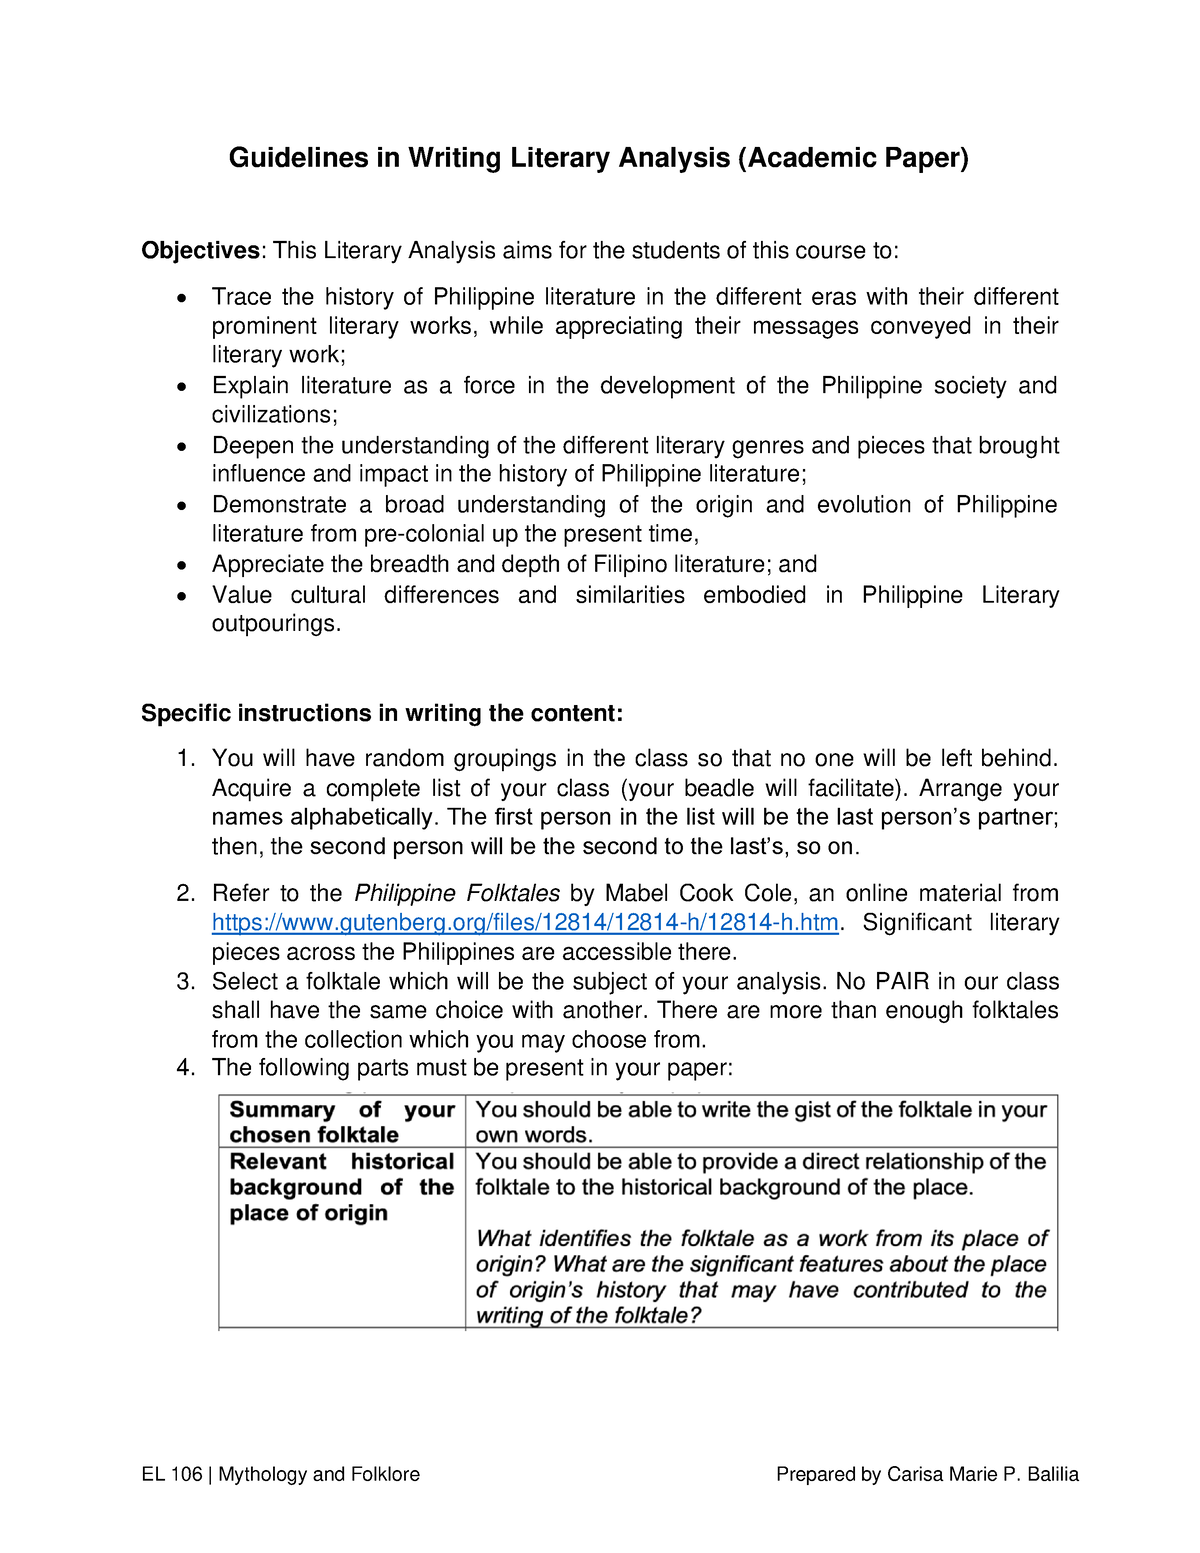 EL 106 Literary Analysis Guidelines - Guidelines in Writing Literary ...